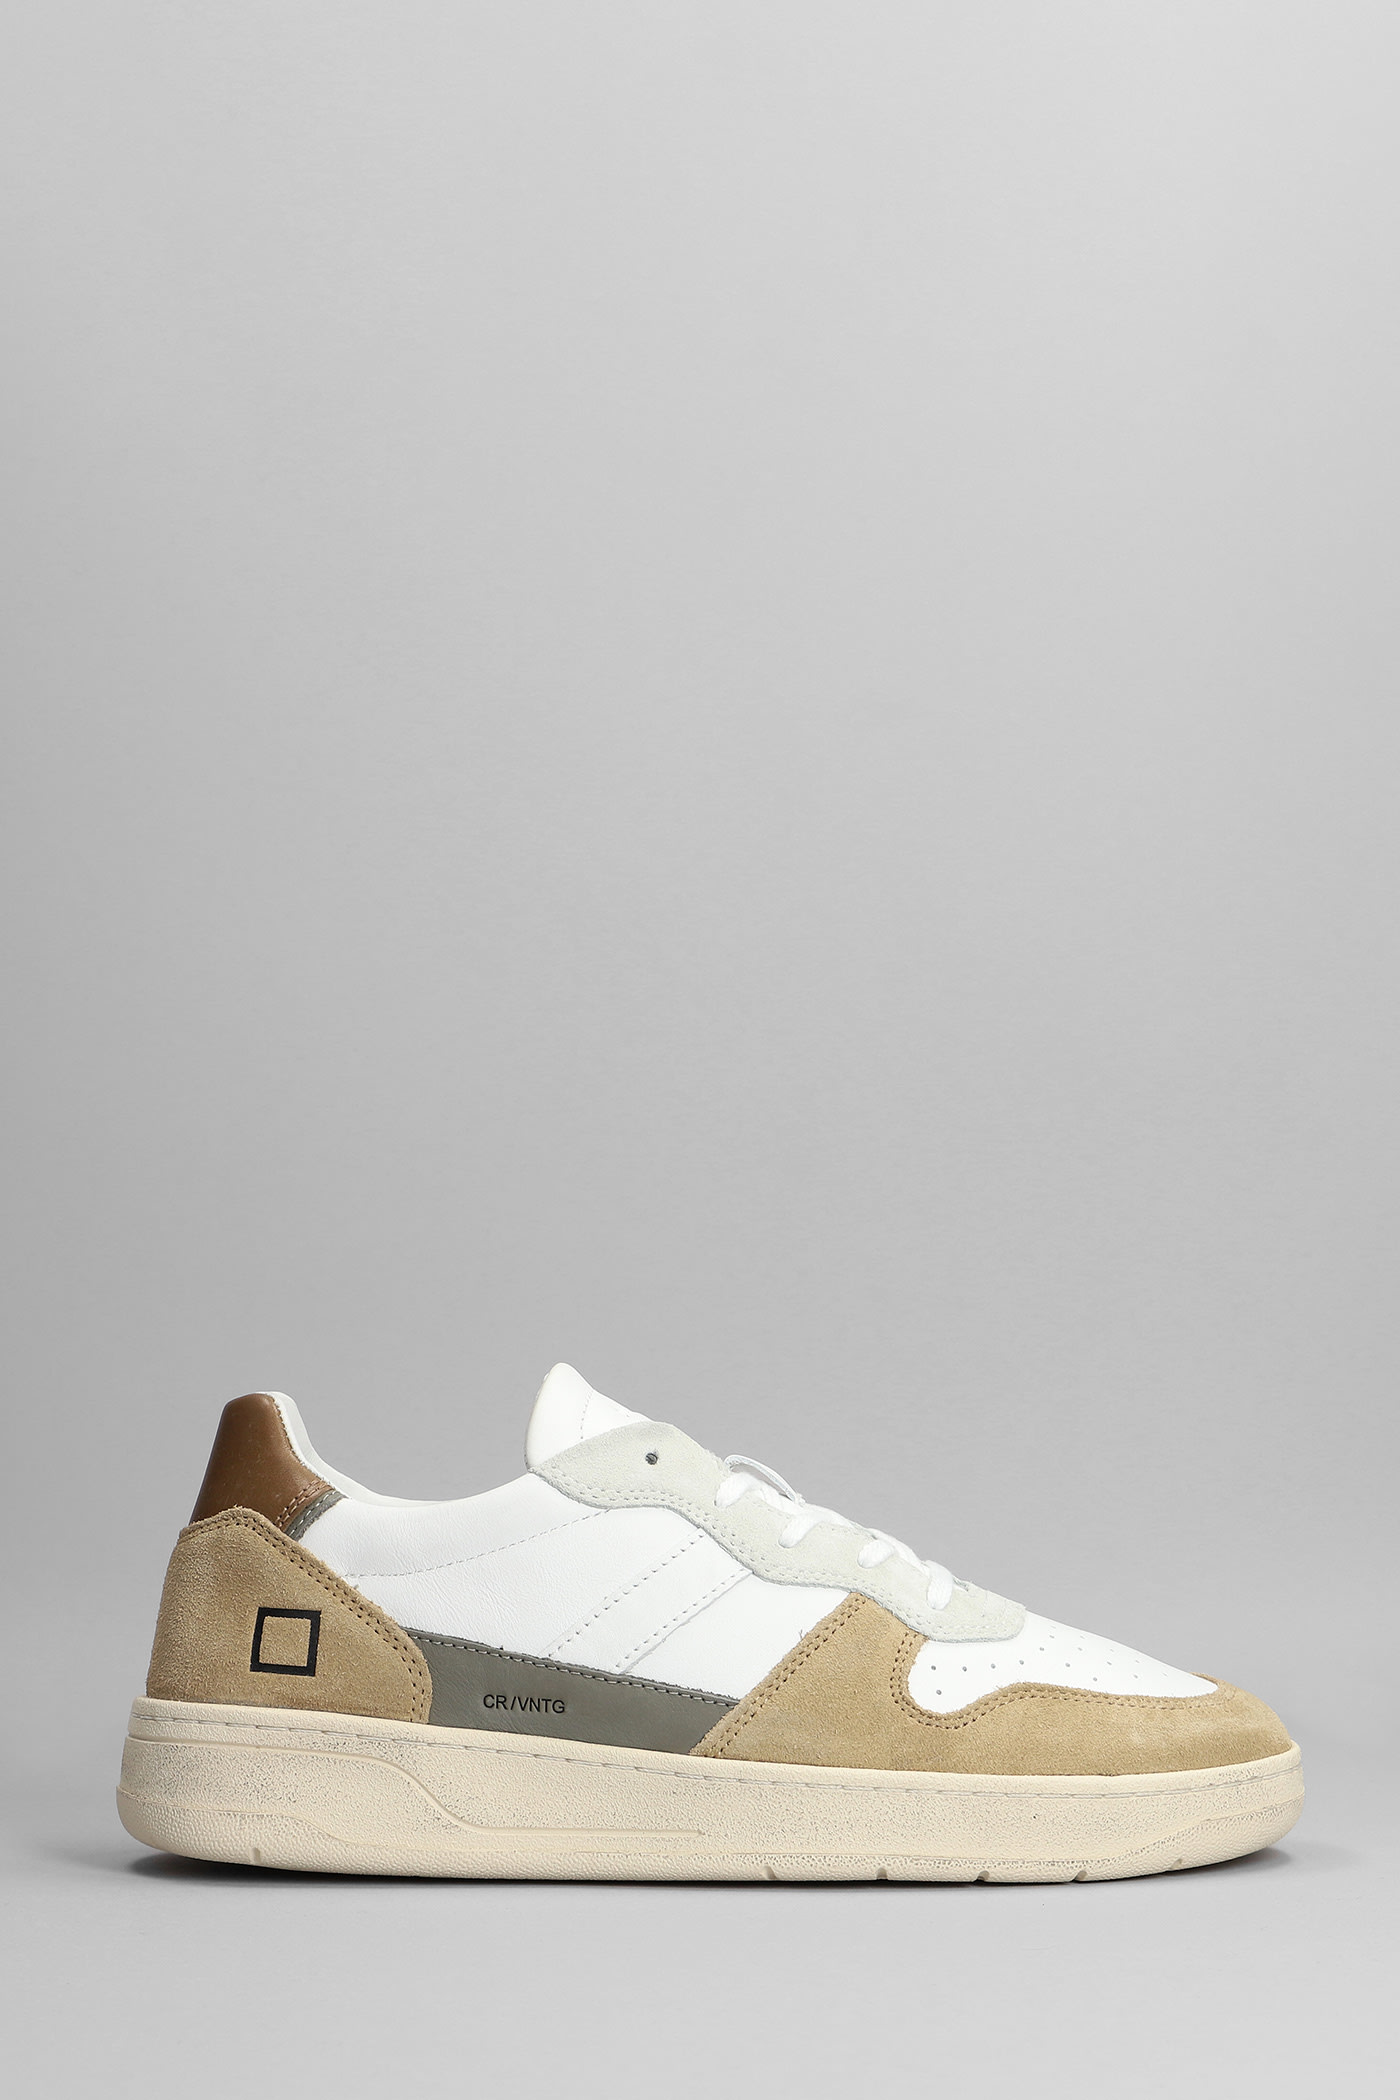 DATE CURT 2.0 SNEAKERS IN BEIGE SUEDE AND LEATHER